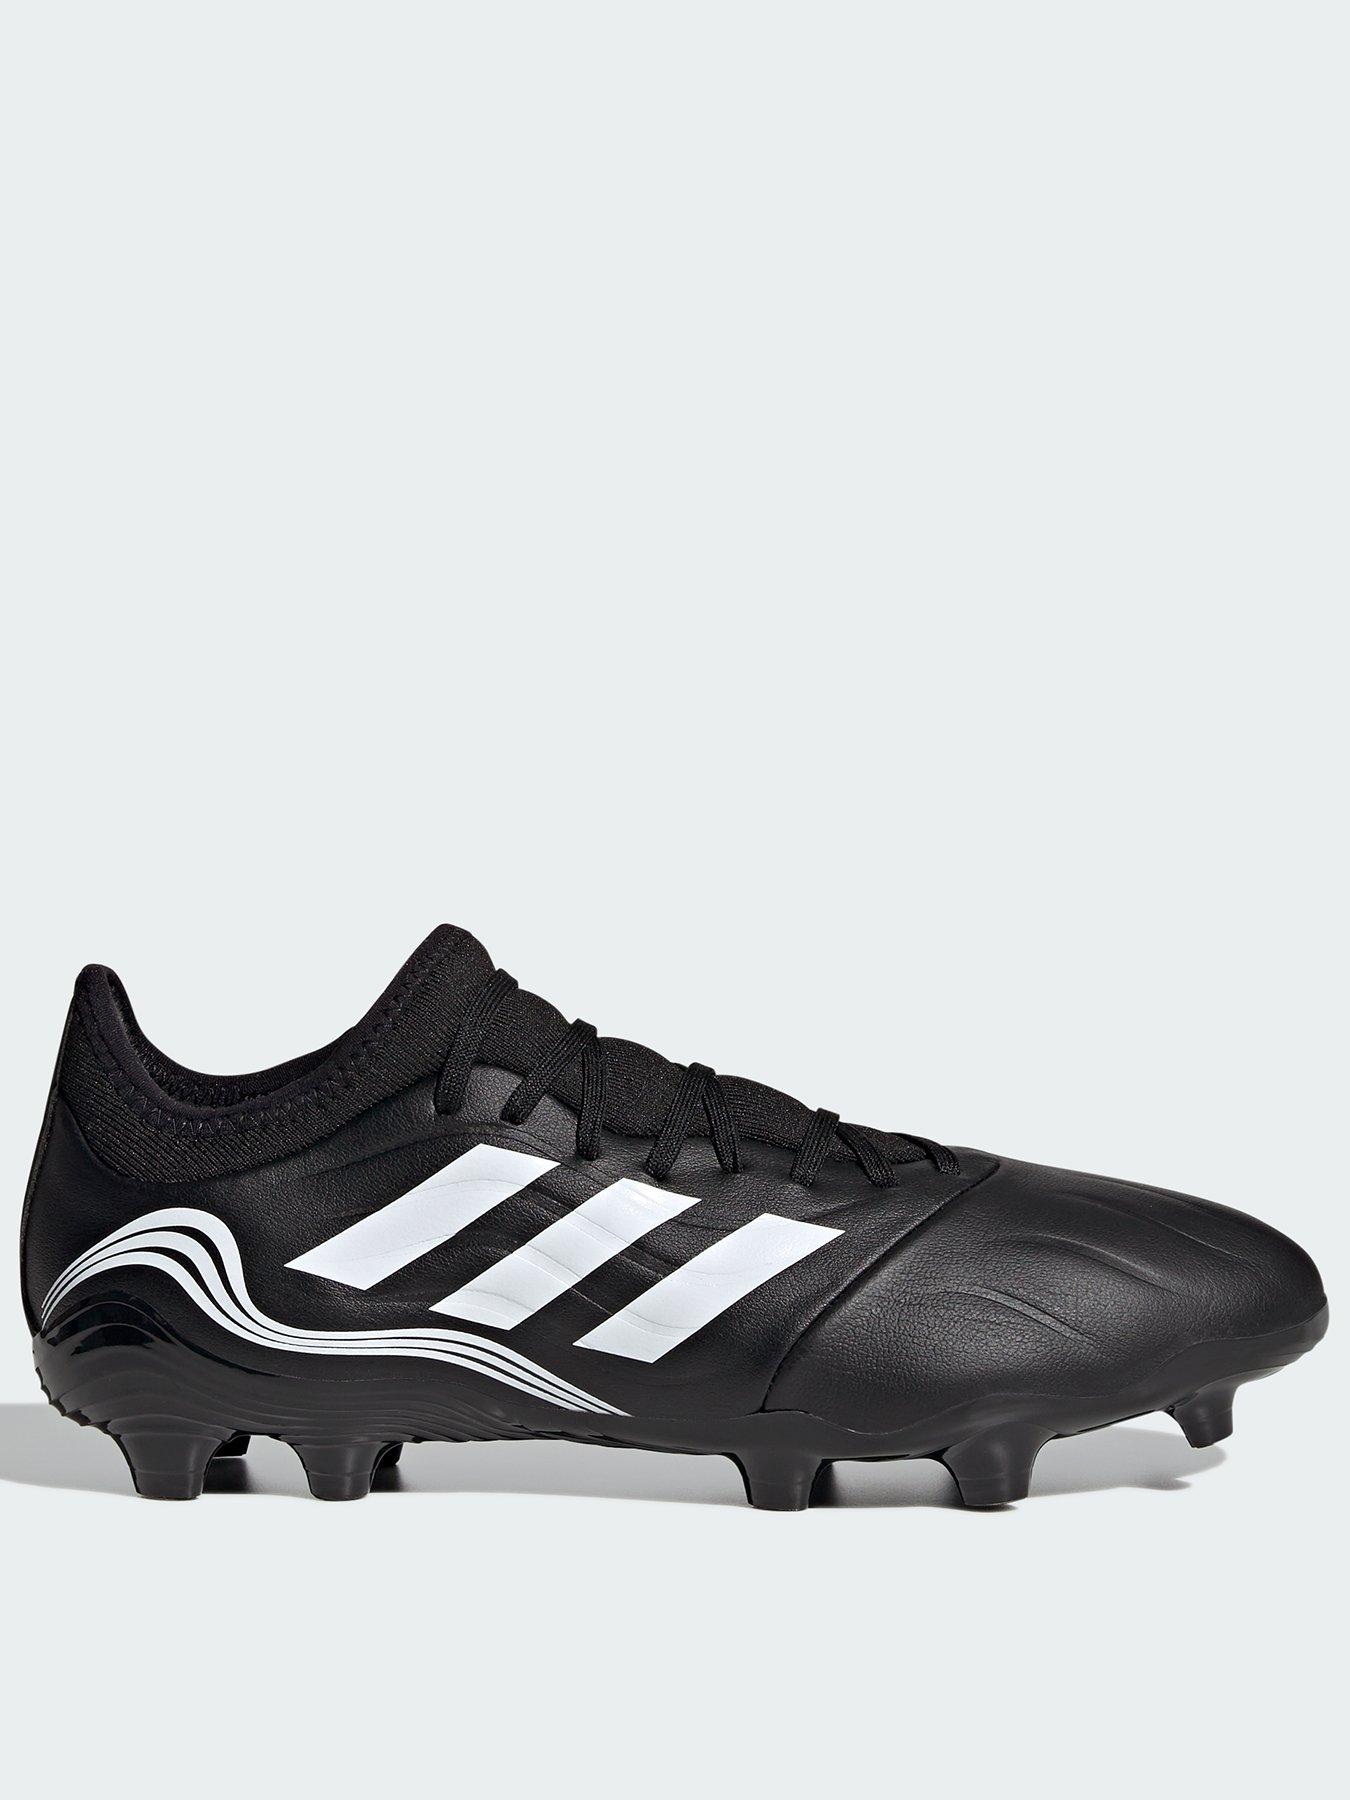 adidas Copa | Football boots | Mens sports shoes | Sports & | www.very.co.uk